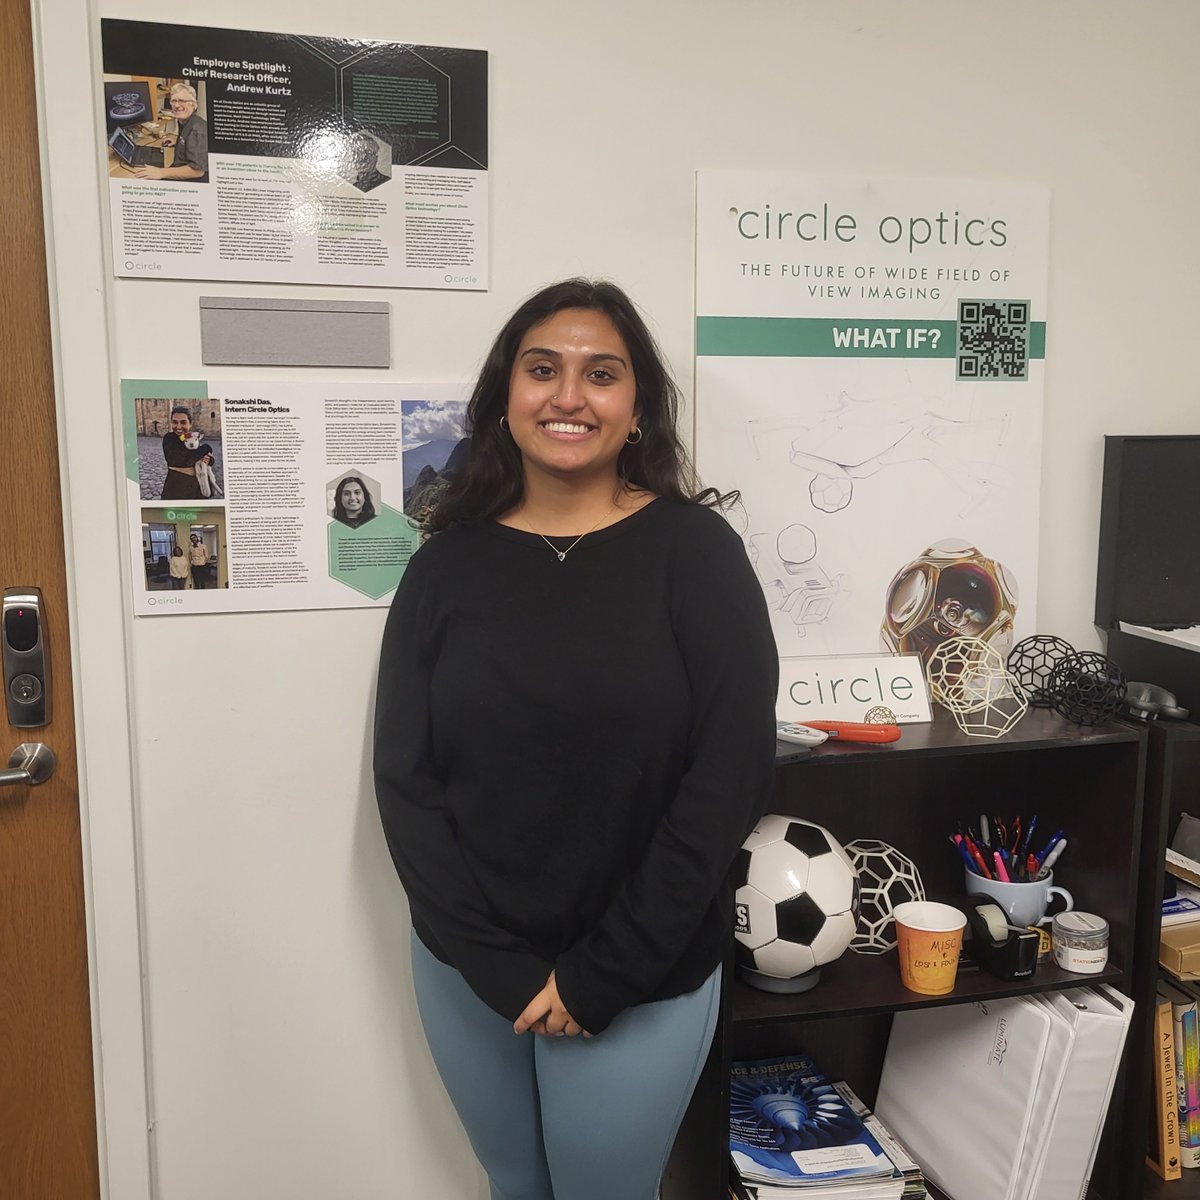 Read all about @circleoptics intern Sonakshi Das in our #360Pulse Magazine. Sonakshi has worked with us for over a year and today is her last day. We are so appreciative of all the ways she helped us get organized, helped our documentation efficiency circleoptics.com/wp-content/upl…